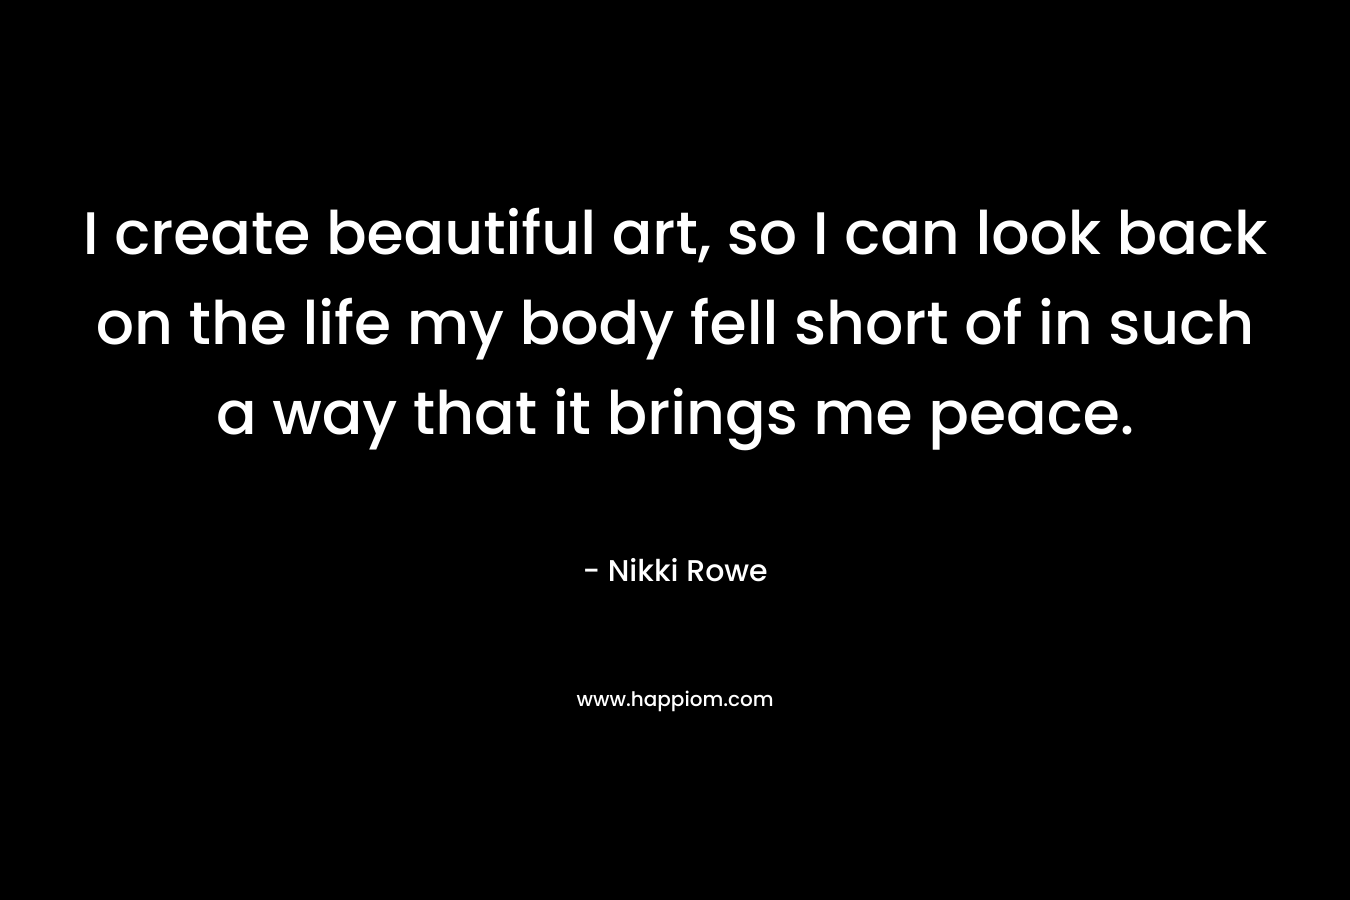 I create beautiful art, so I can look back on the life my body fell short of in such a way that it brings me peace.